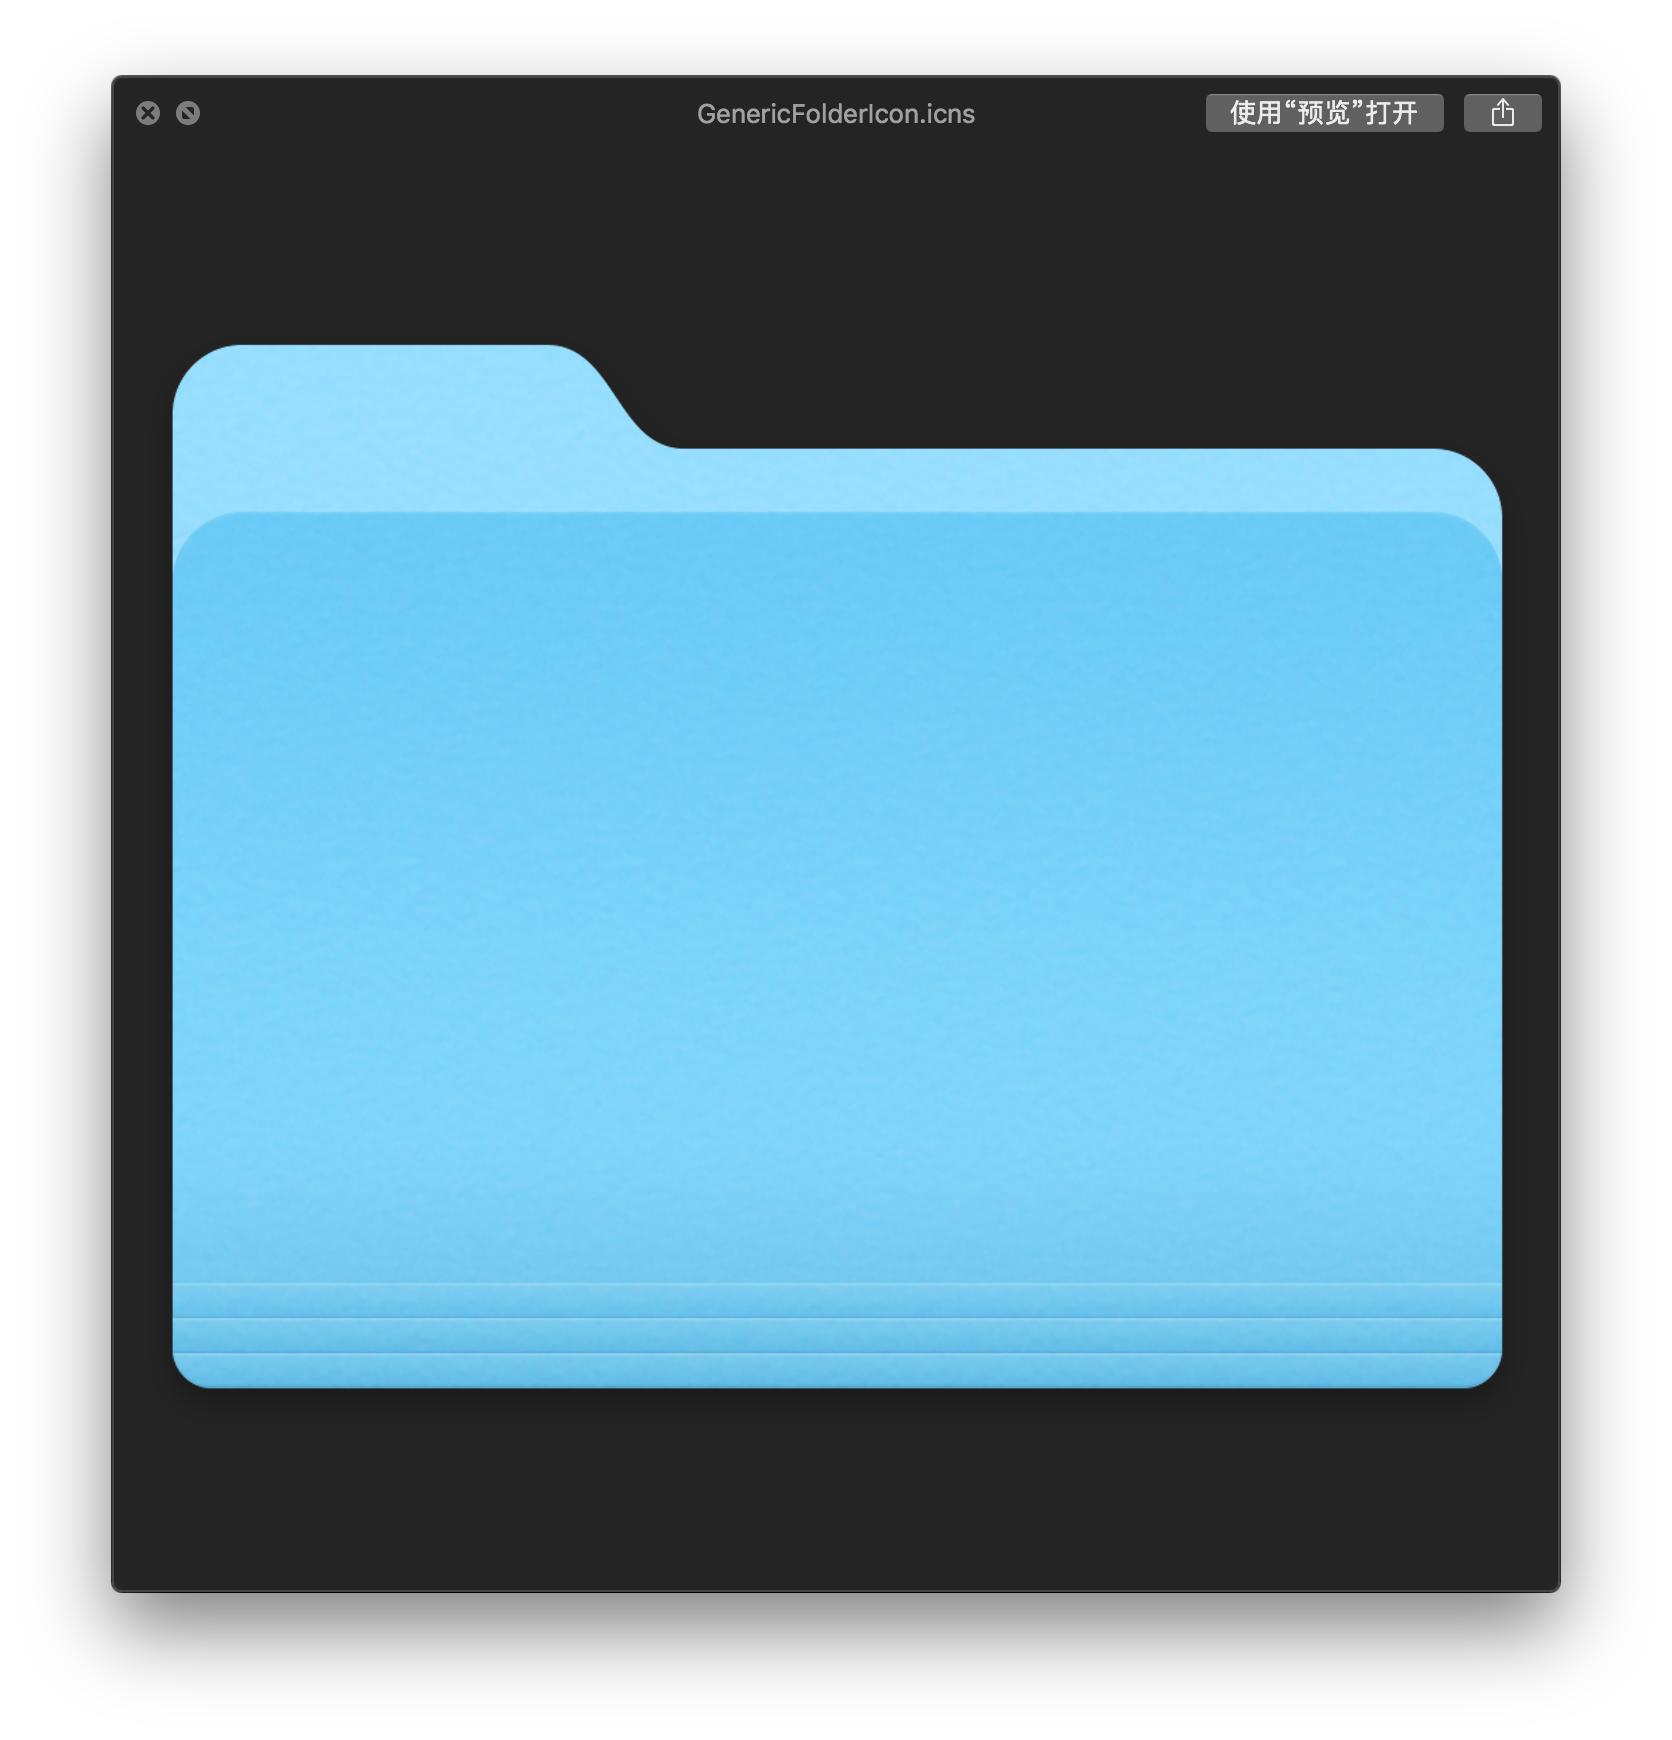 folder and icon customize mac free download